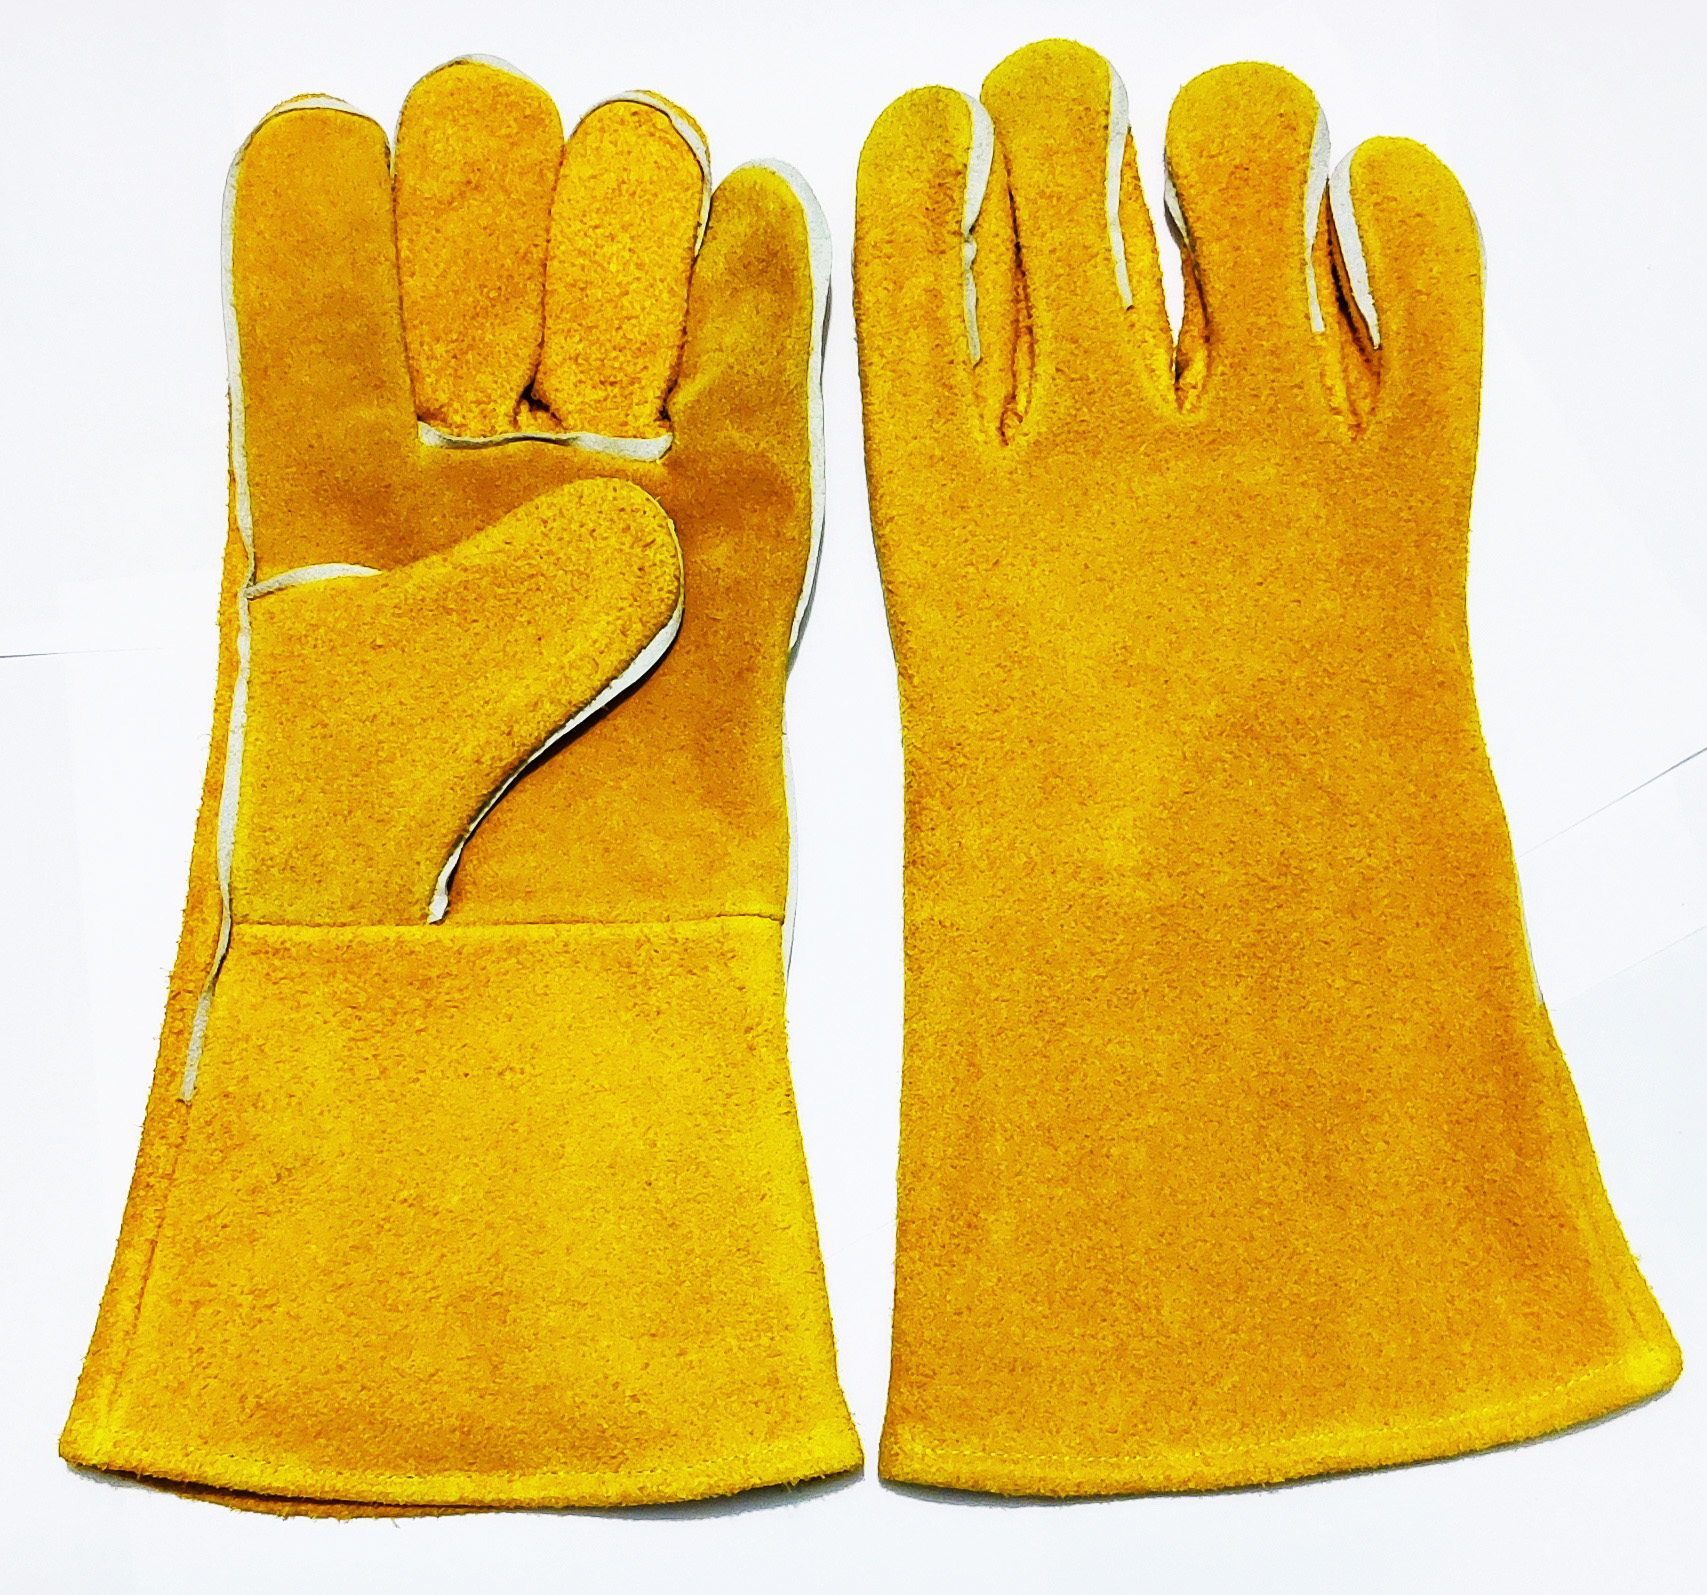 Bangladeshi Leather Gloves Suppliers and Manufacturers